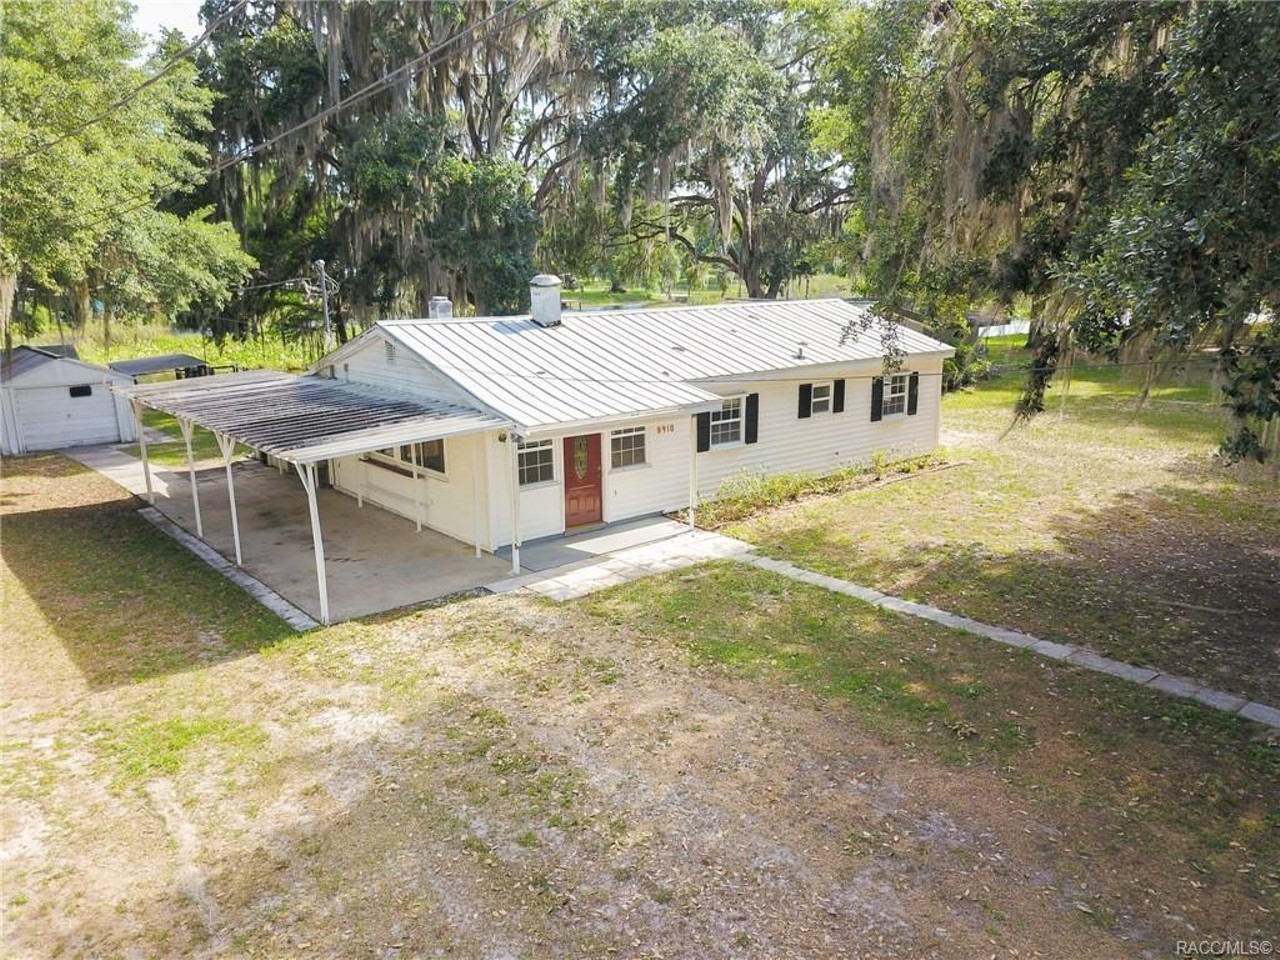 8910 E Tsala Apopka Drive, Inverness 
PRICE: $169,000
This property in Inverness doesn&#146;t look like much from the outside, but the interior reveals a beautiful kitchen. And who needs to hang out indoors anyway, with the Tsala Apopka chain of lakes in the backyard.
